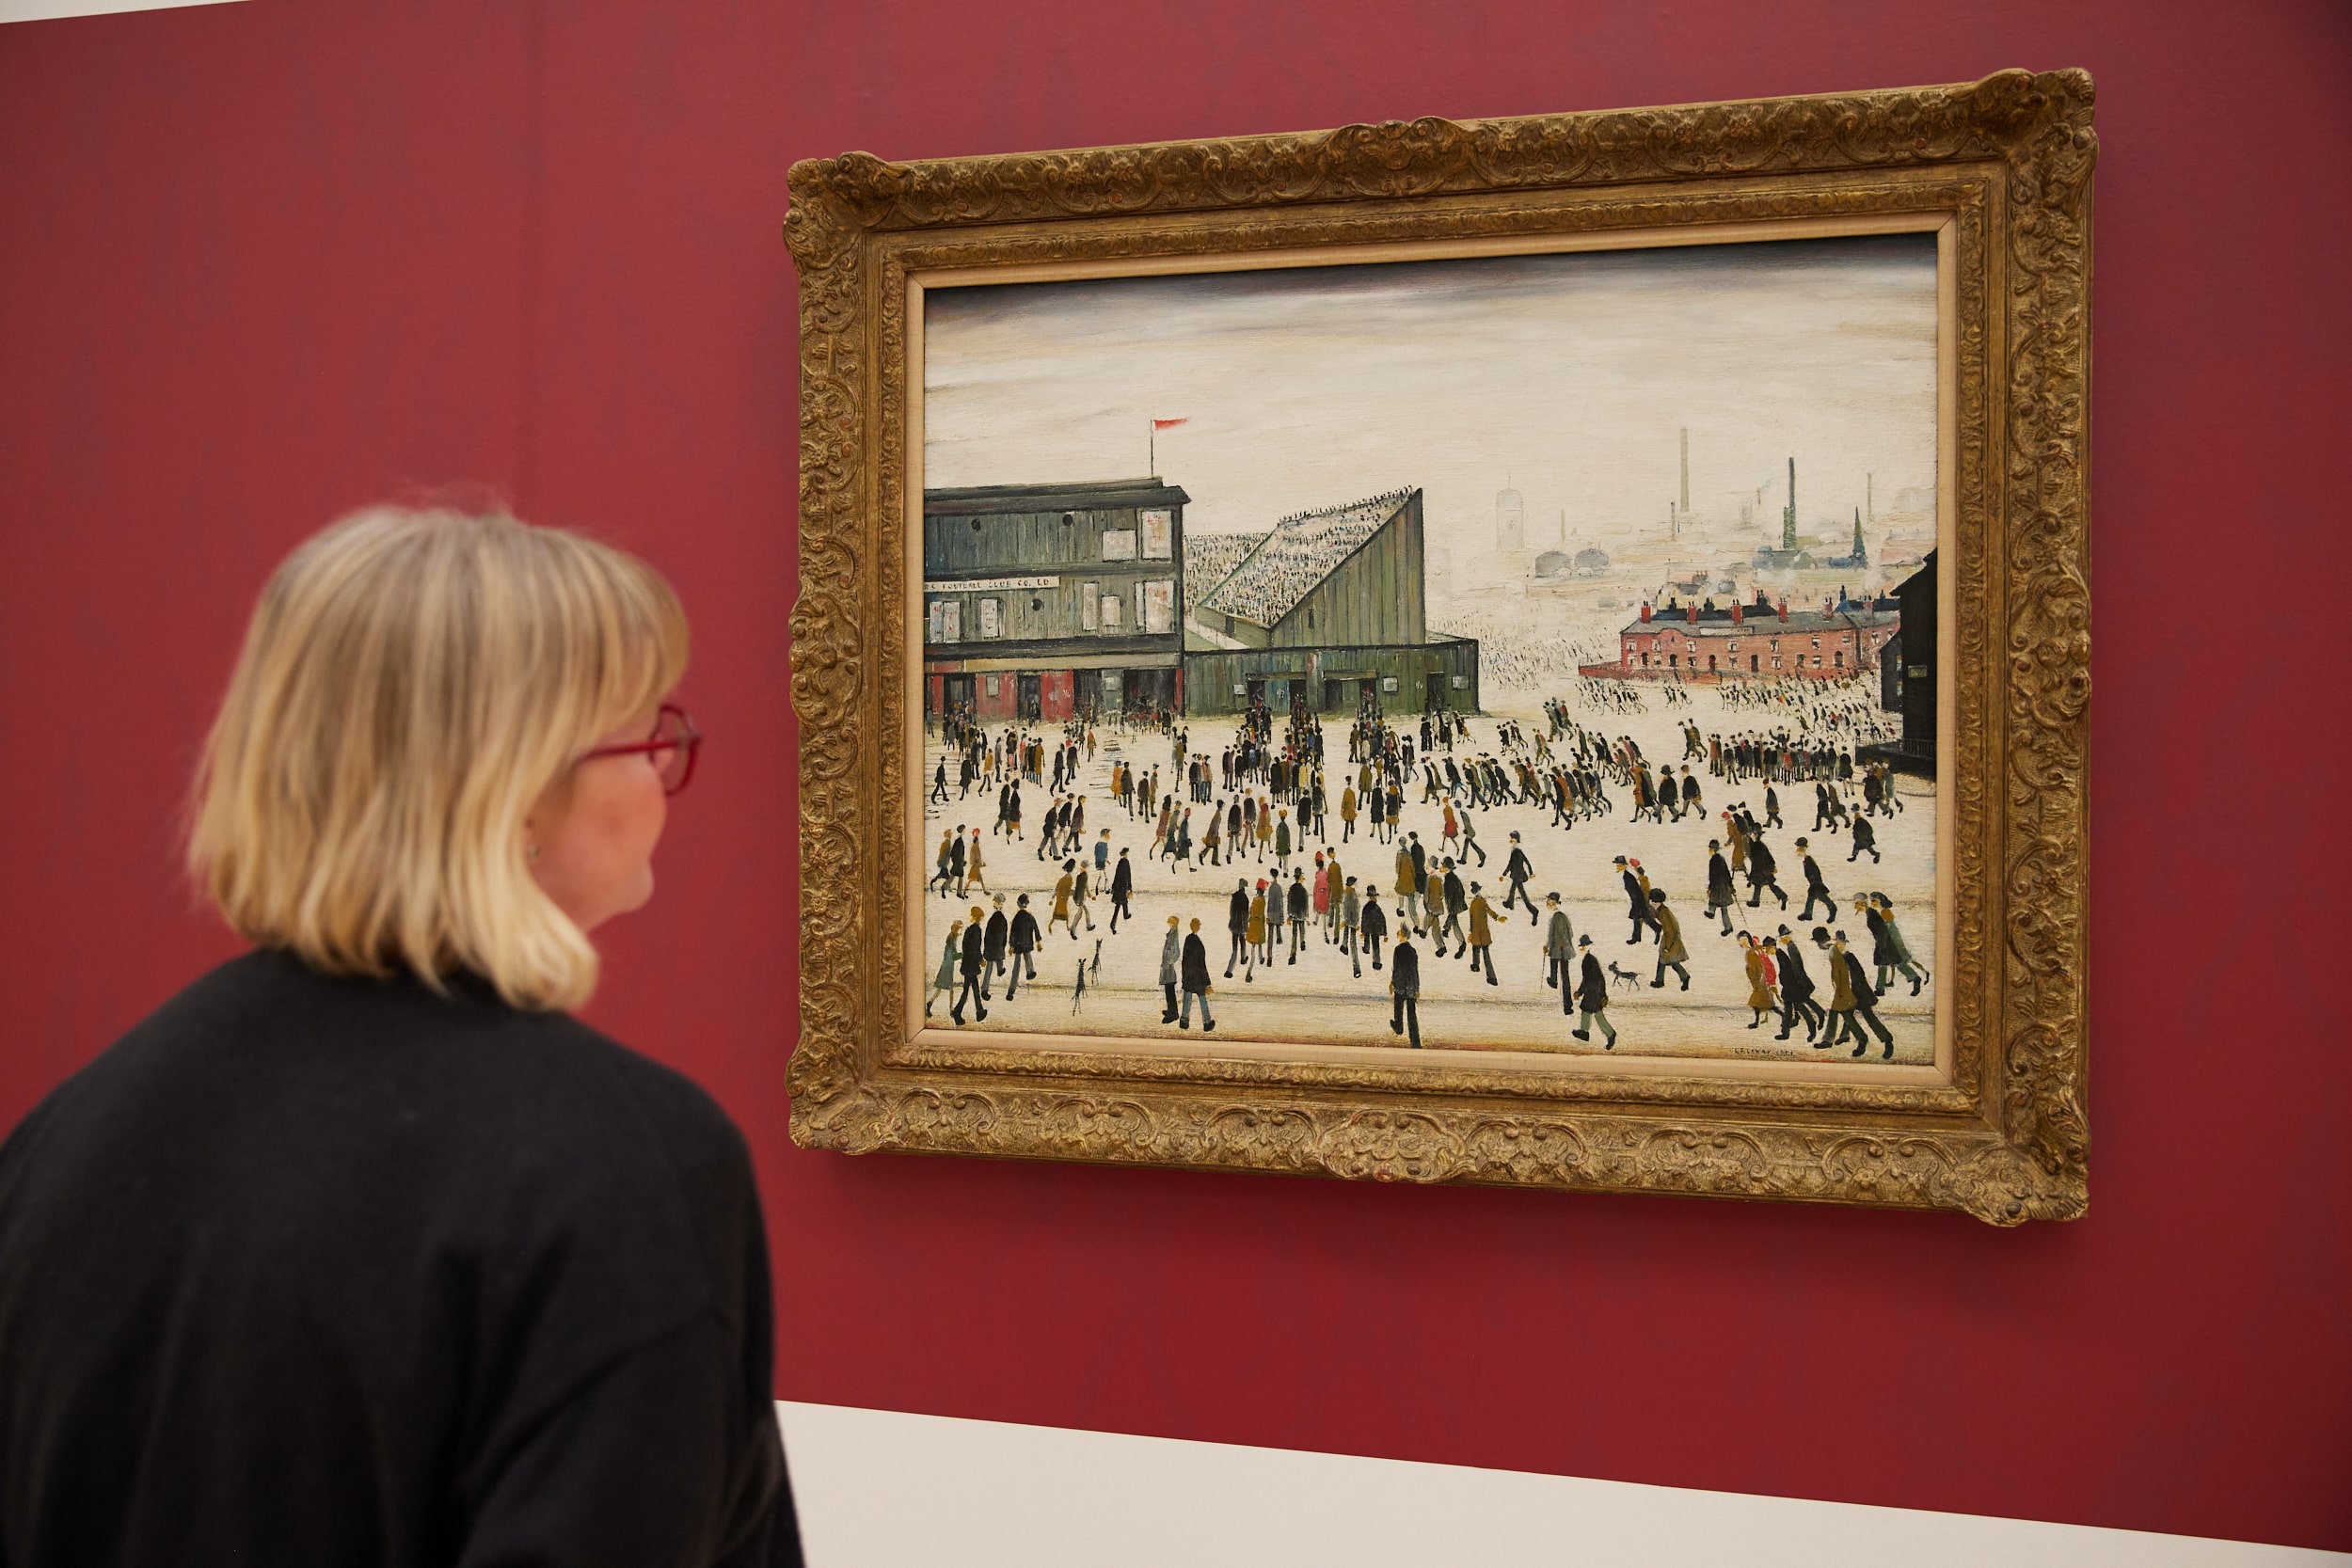 photograph of a woman with short, light hair looking at Lowry's painting Going To The Match, which is hanging on a red wall.